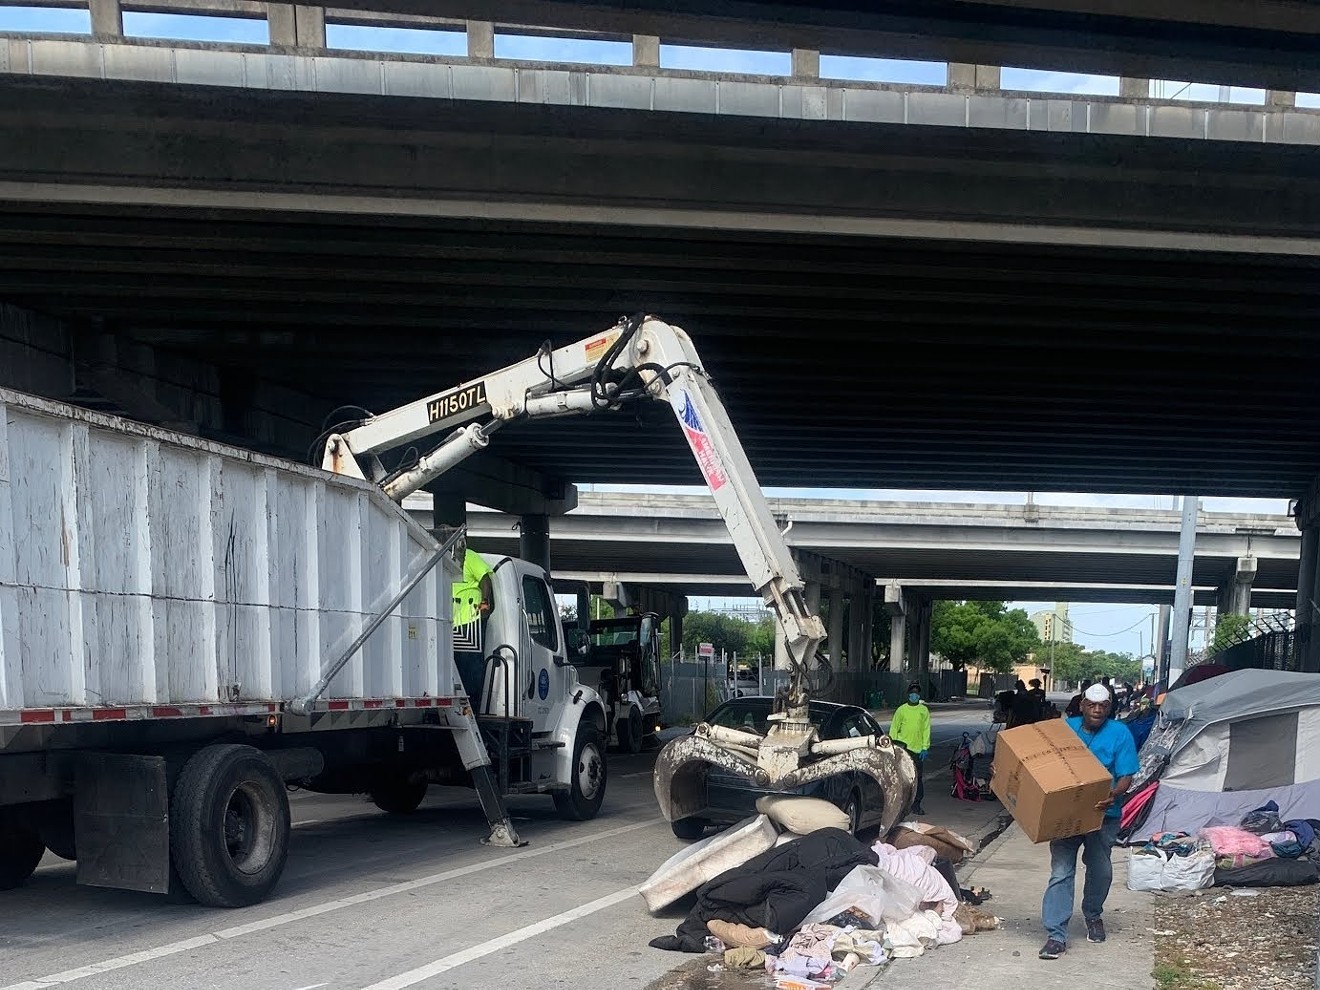 Workers clear out belongings at a homeless encampment in Overtown on the morning of May 13, 2020